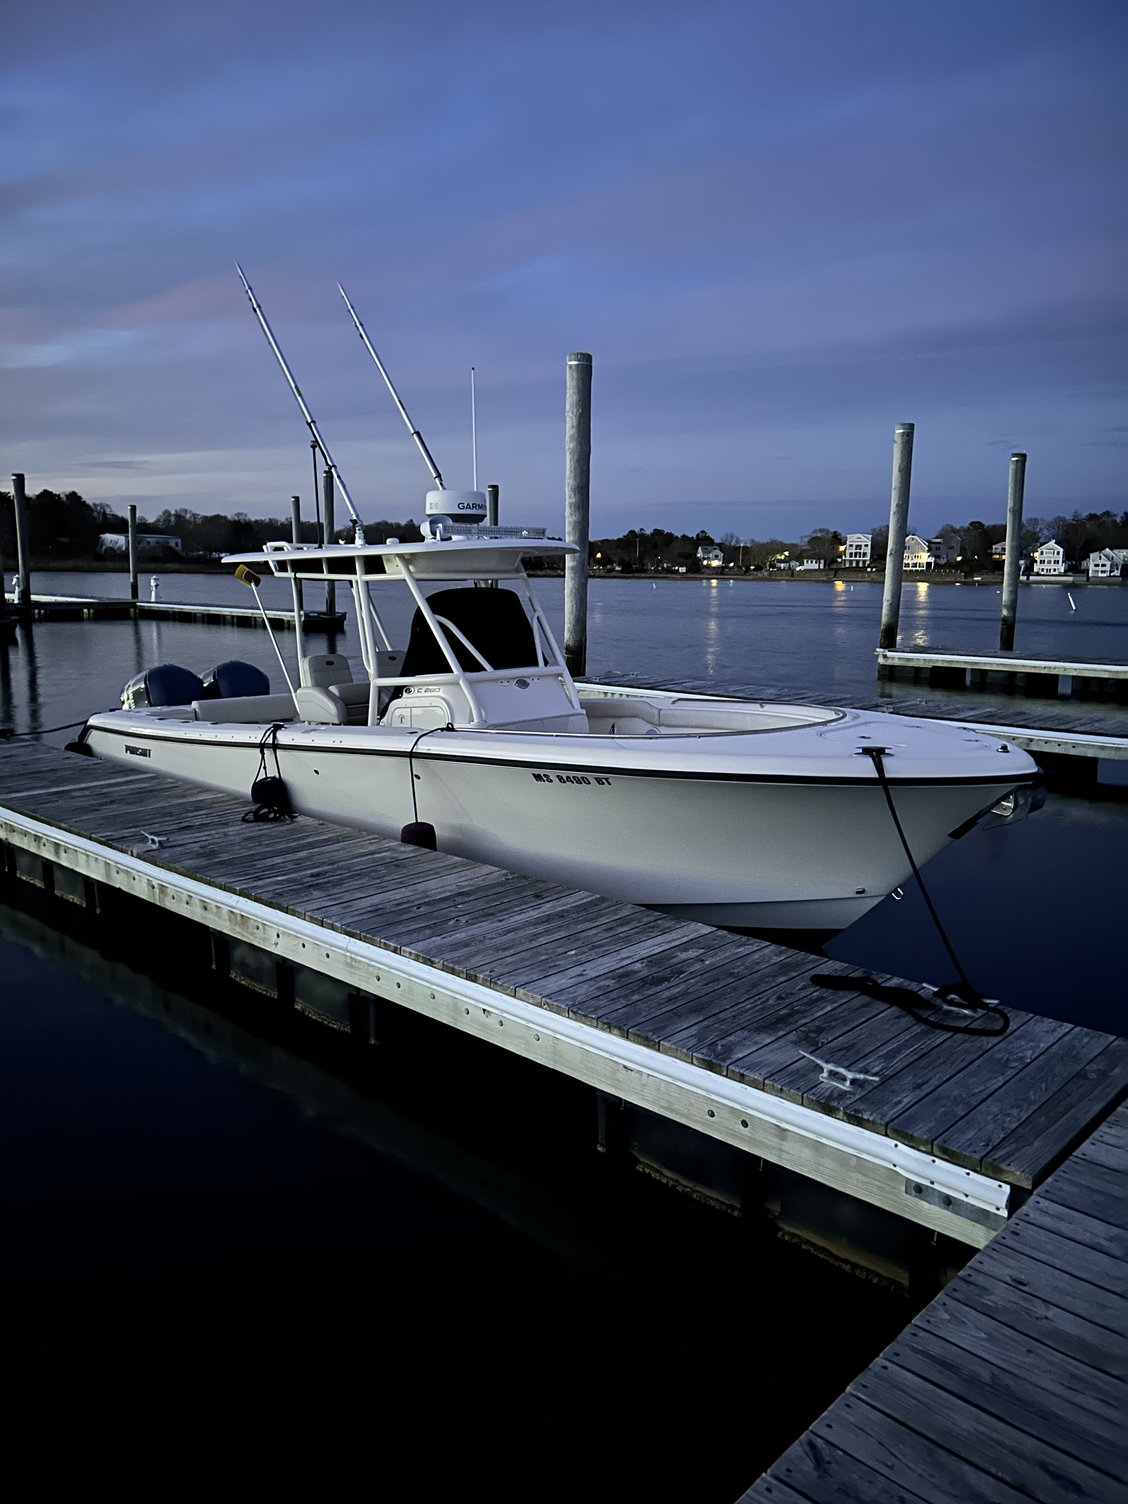 2012 Pursuit C280 w/ Yamaha 250 - The Hull Truth - Boating and